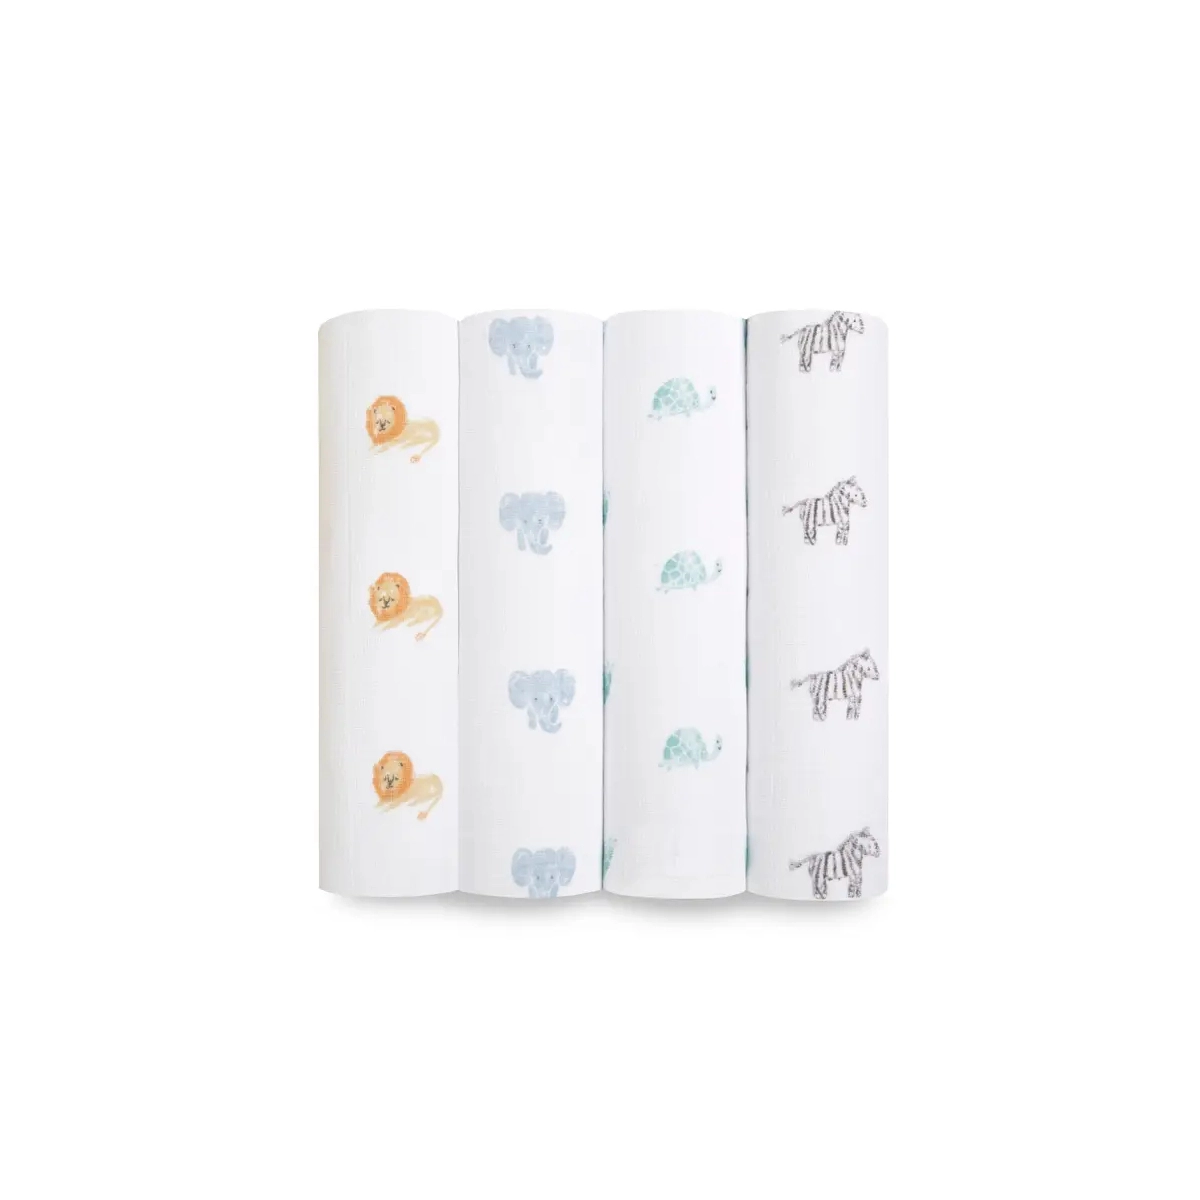 Image of Aden + Anais Pack of 4 Large Swaddle Organic Cotton Muslin - Animal Kingdom (23-19-044)